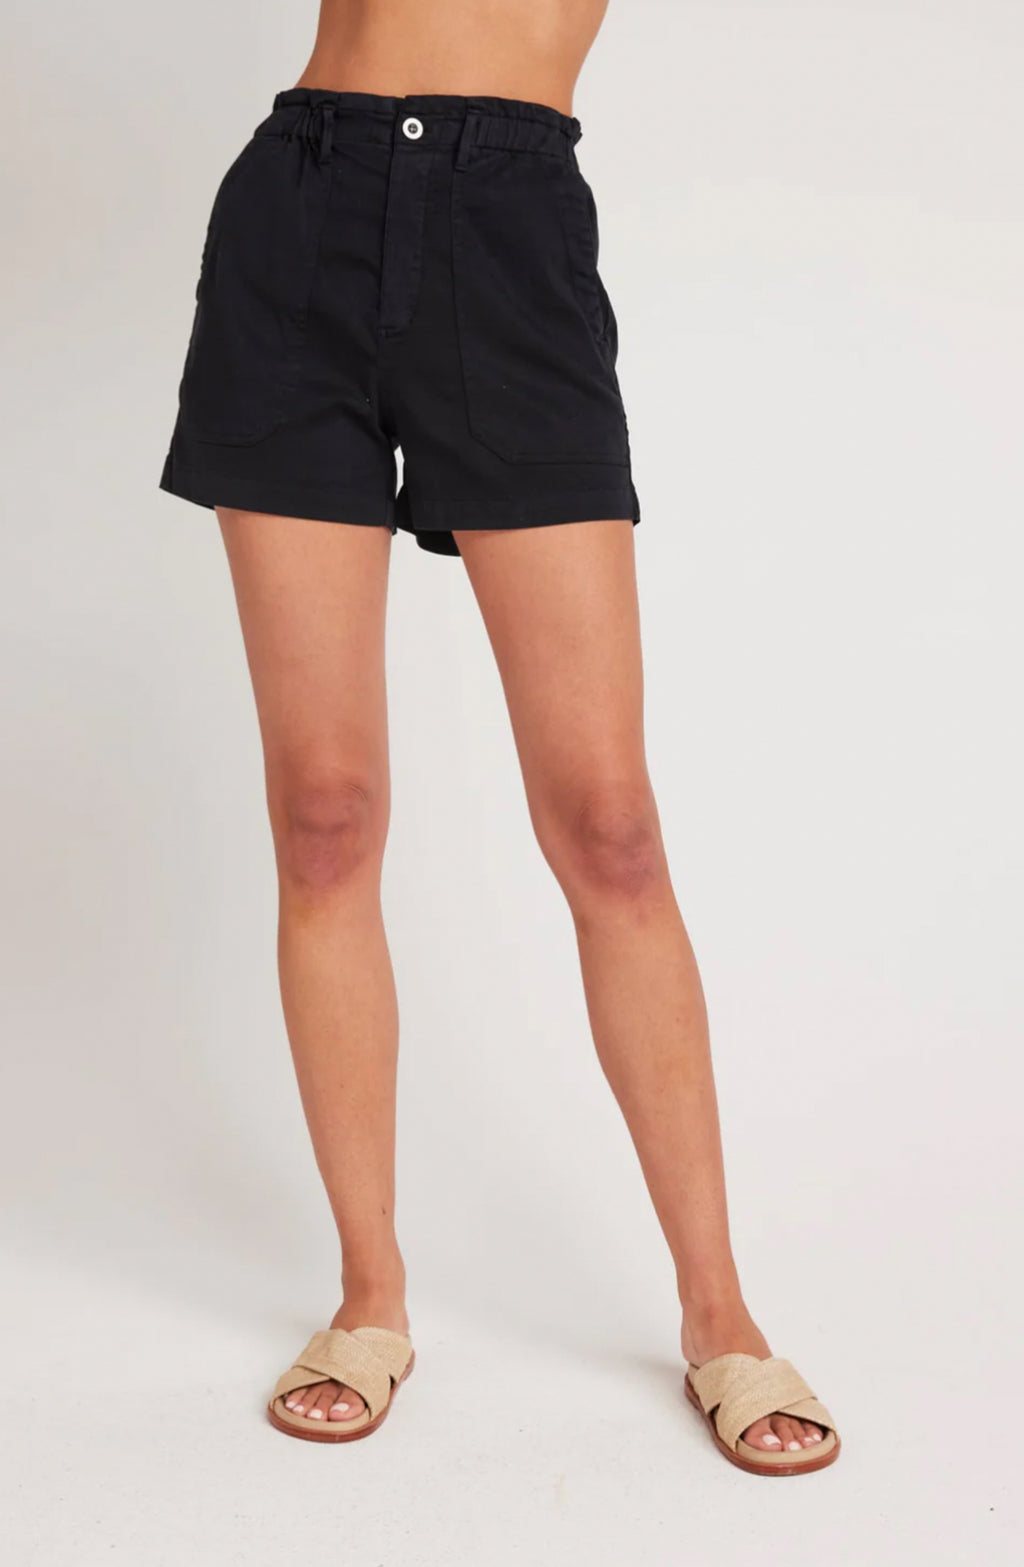 FAIIVE Lawore Stretch Twill Shorts, Forlair Stretch Shorts, Women's Casual  Sport Stretch Twill Shorts with Pockets (as1, Alpha, s, Regular, Regular,  Black) at  Women's Clothing store